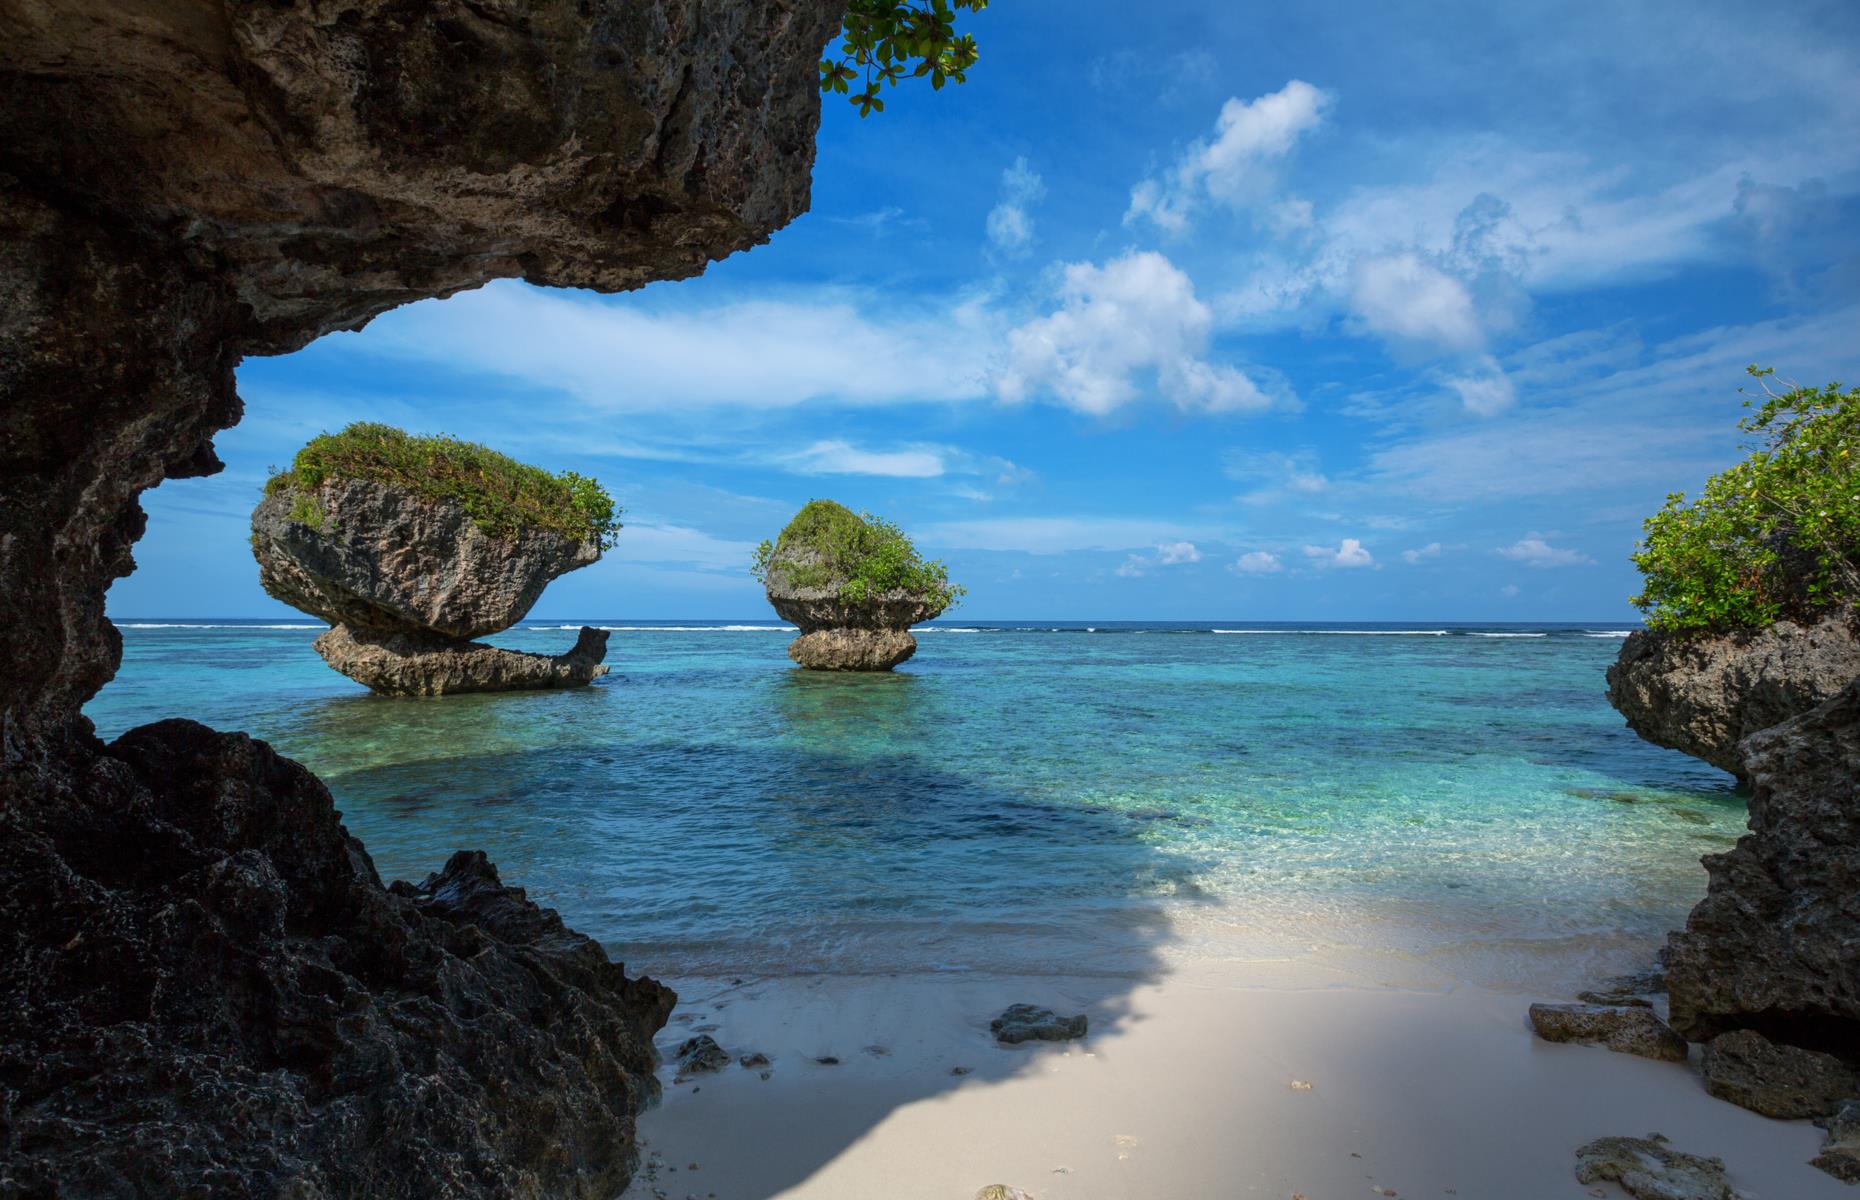 <p>The tropical island of Guam, a US territory in the western Pacific, has incredibly consistent temperatures with <a href="https://www.climatestotravel.com/climate/guam">average highs</a> hovering around 86-88°F (30-31°C) all year. While it can be rainy as it lies in the path of typhoons, the best time to visit is usually February-April when it’s relatively dry and calm. The scenery and atmosphere add to the glow, from the flavorsome and often fiery Chamorro cuisine to the rock formations and shortbread-hued sands of Tanguisson Beach (pictured).</p>